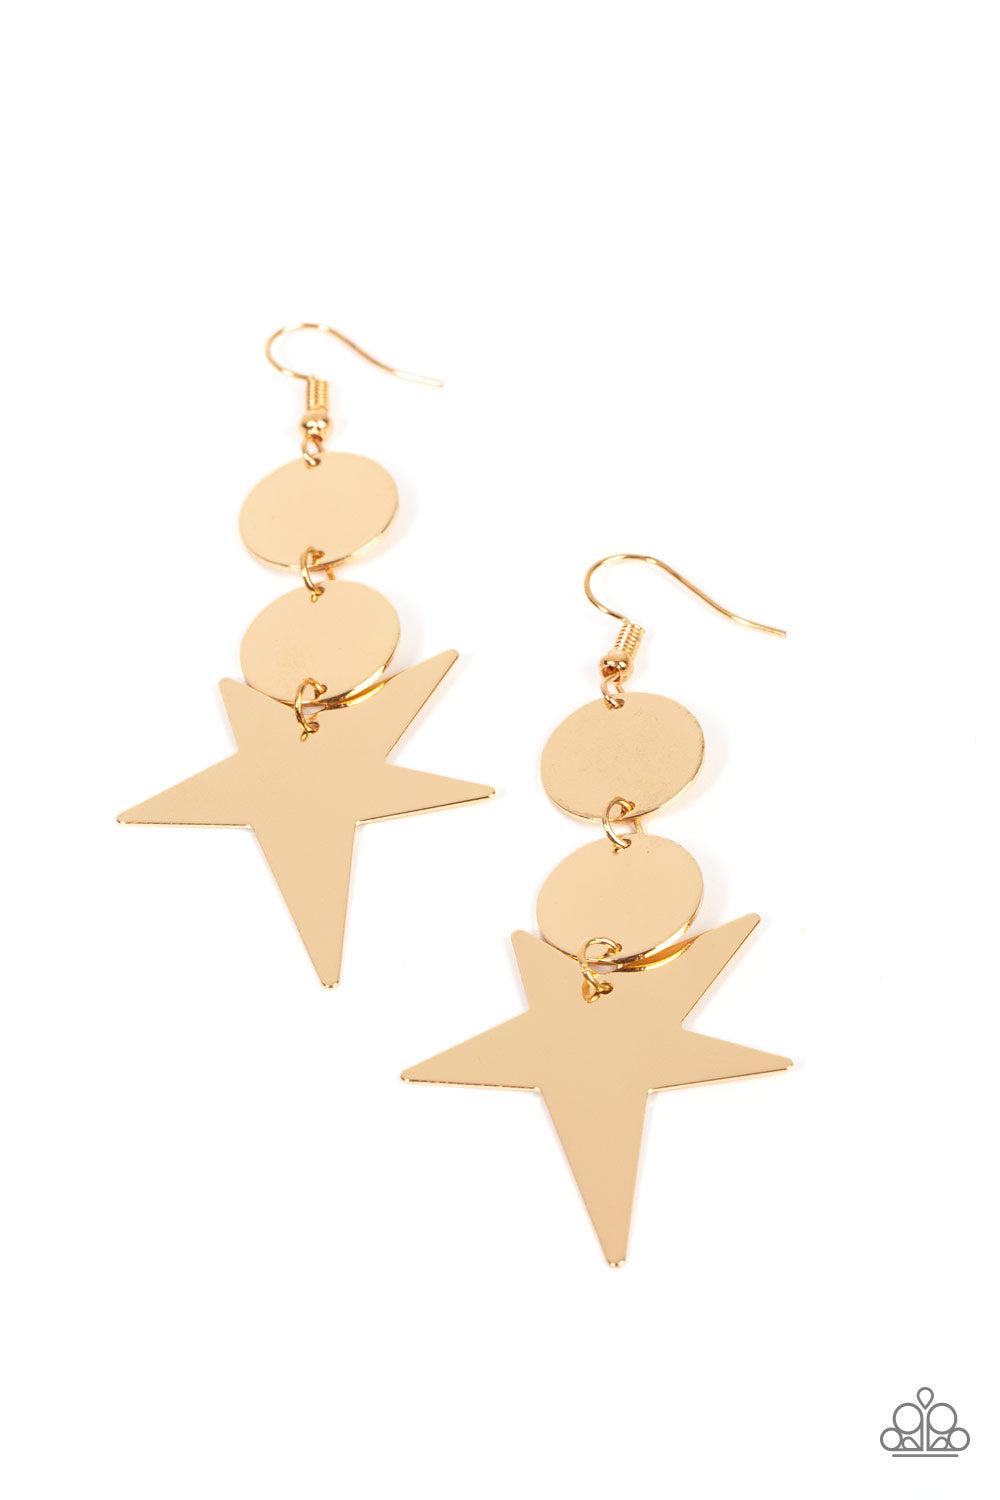 Paparazzi Accessories Star Bizarre Gold: An asymmetrical gold star radiates from two linked flat gold discs, resulting in a stellar lure. Earring attaches to a standard fishhook fitting. Multi: An asymmetrical gunmetal star radiates from two linked flat g